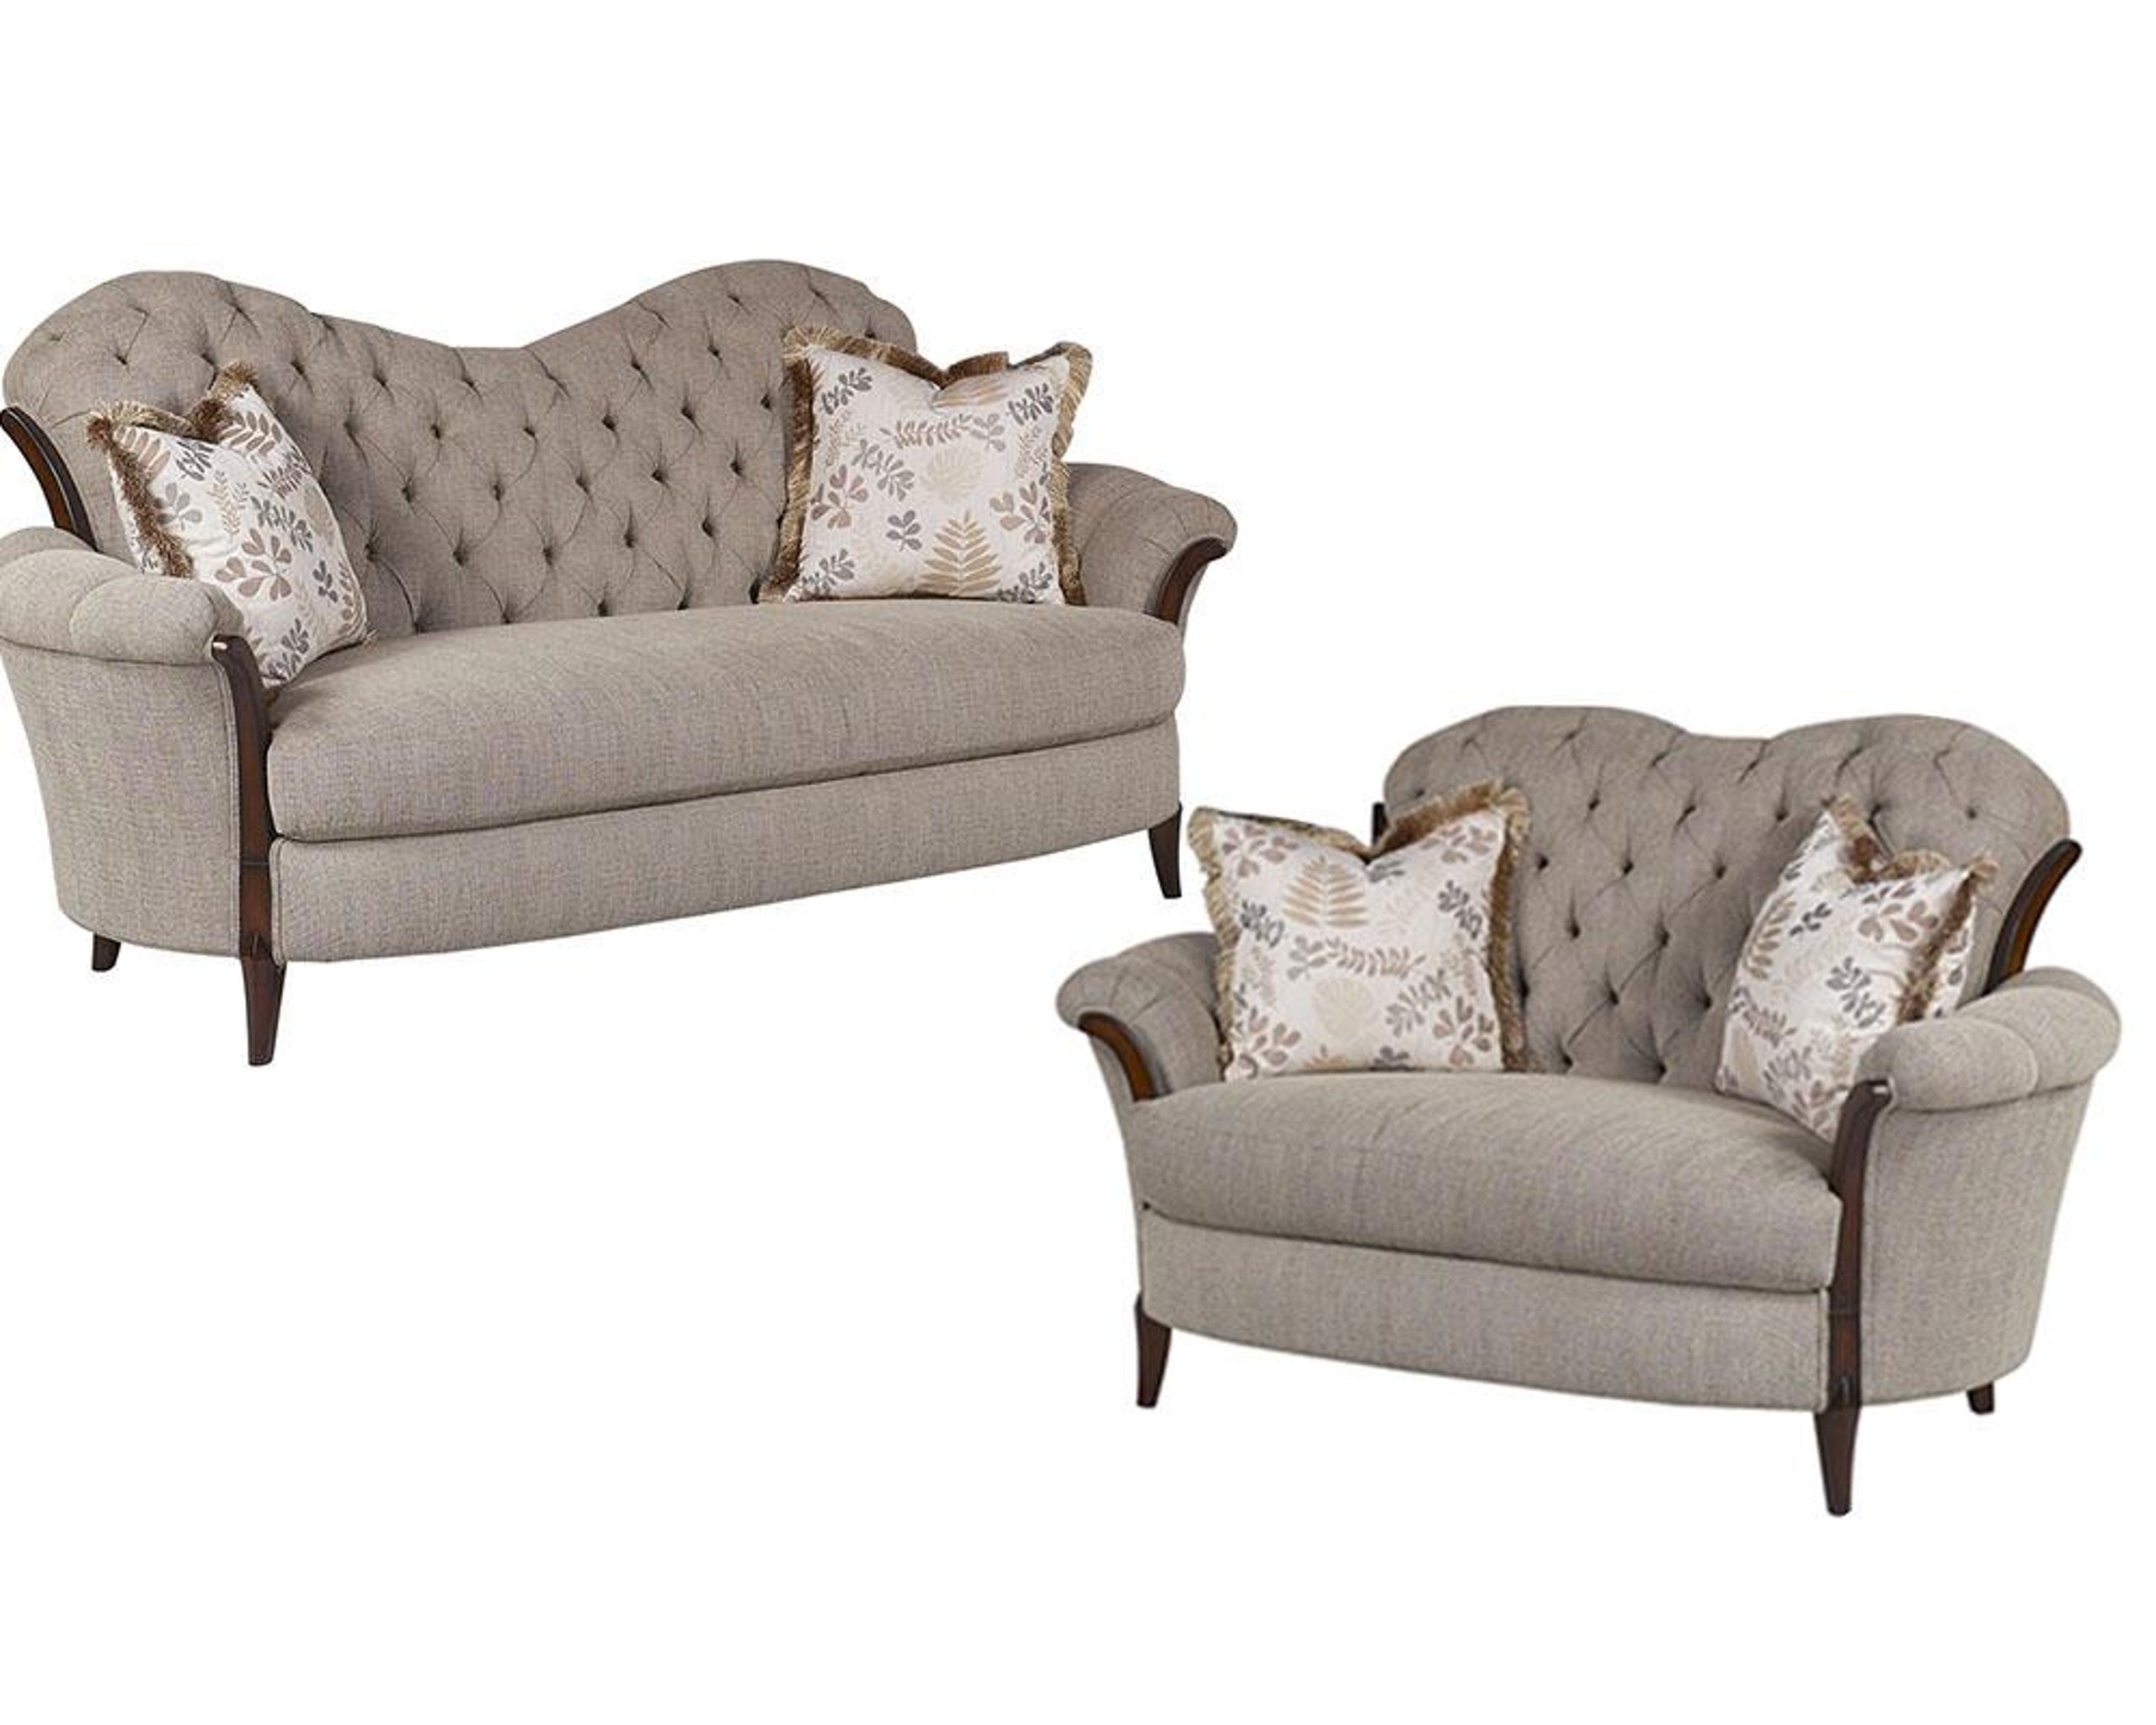 Discover DFS, The Sofa Experts